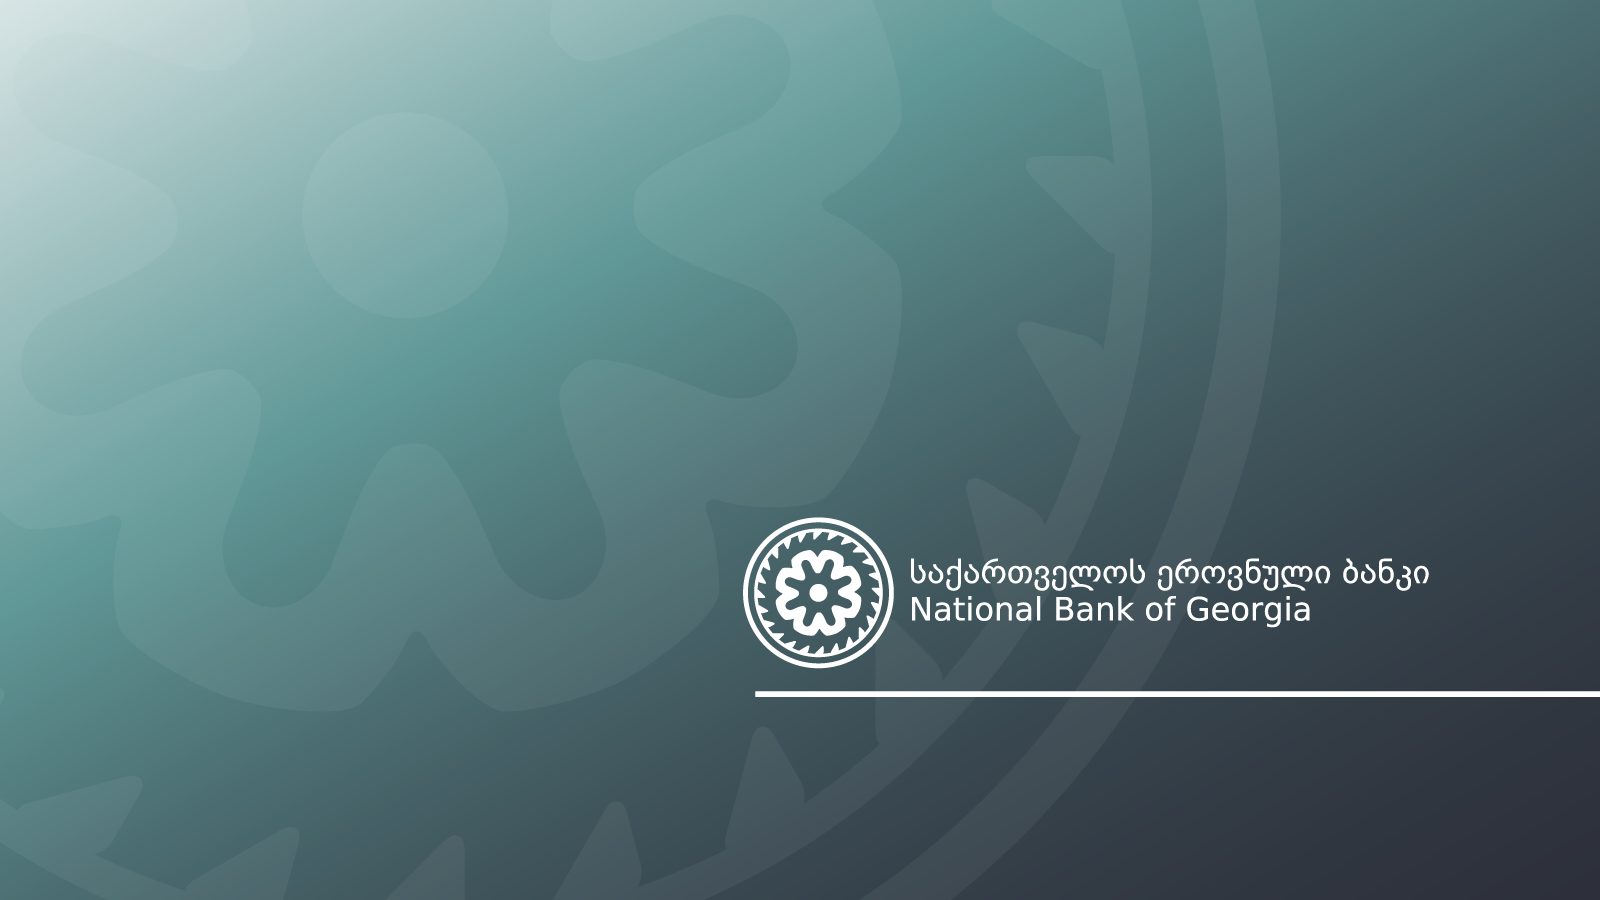 IMF Executive Board Completes the Fifth Review of the Extended Arrangement under the Extended Fund Facility for Georgia